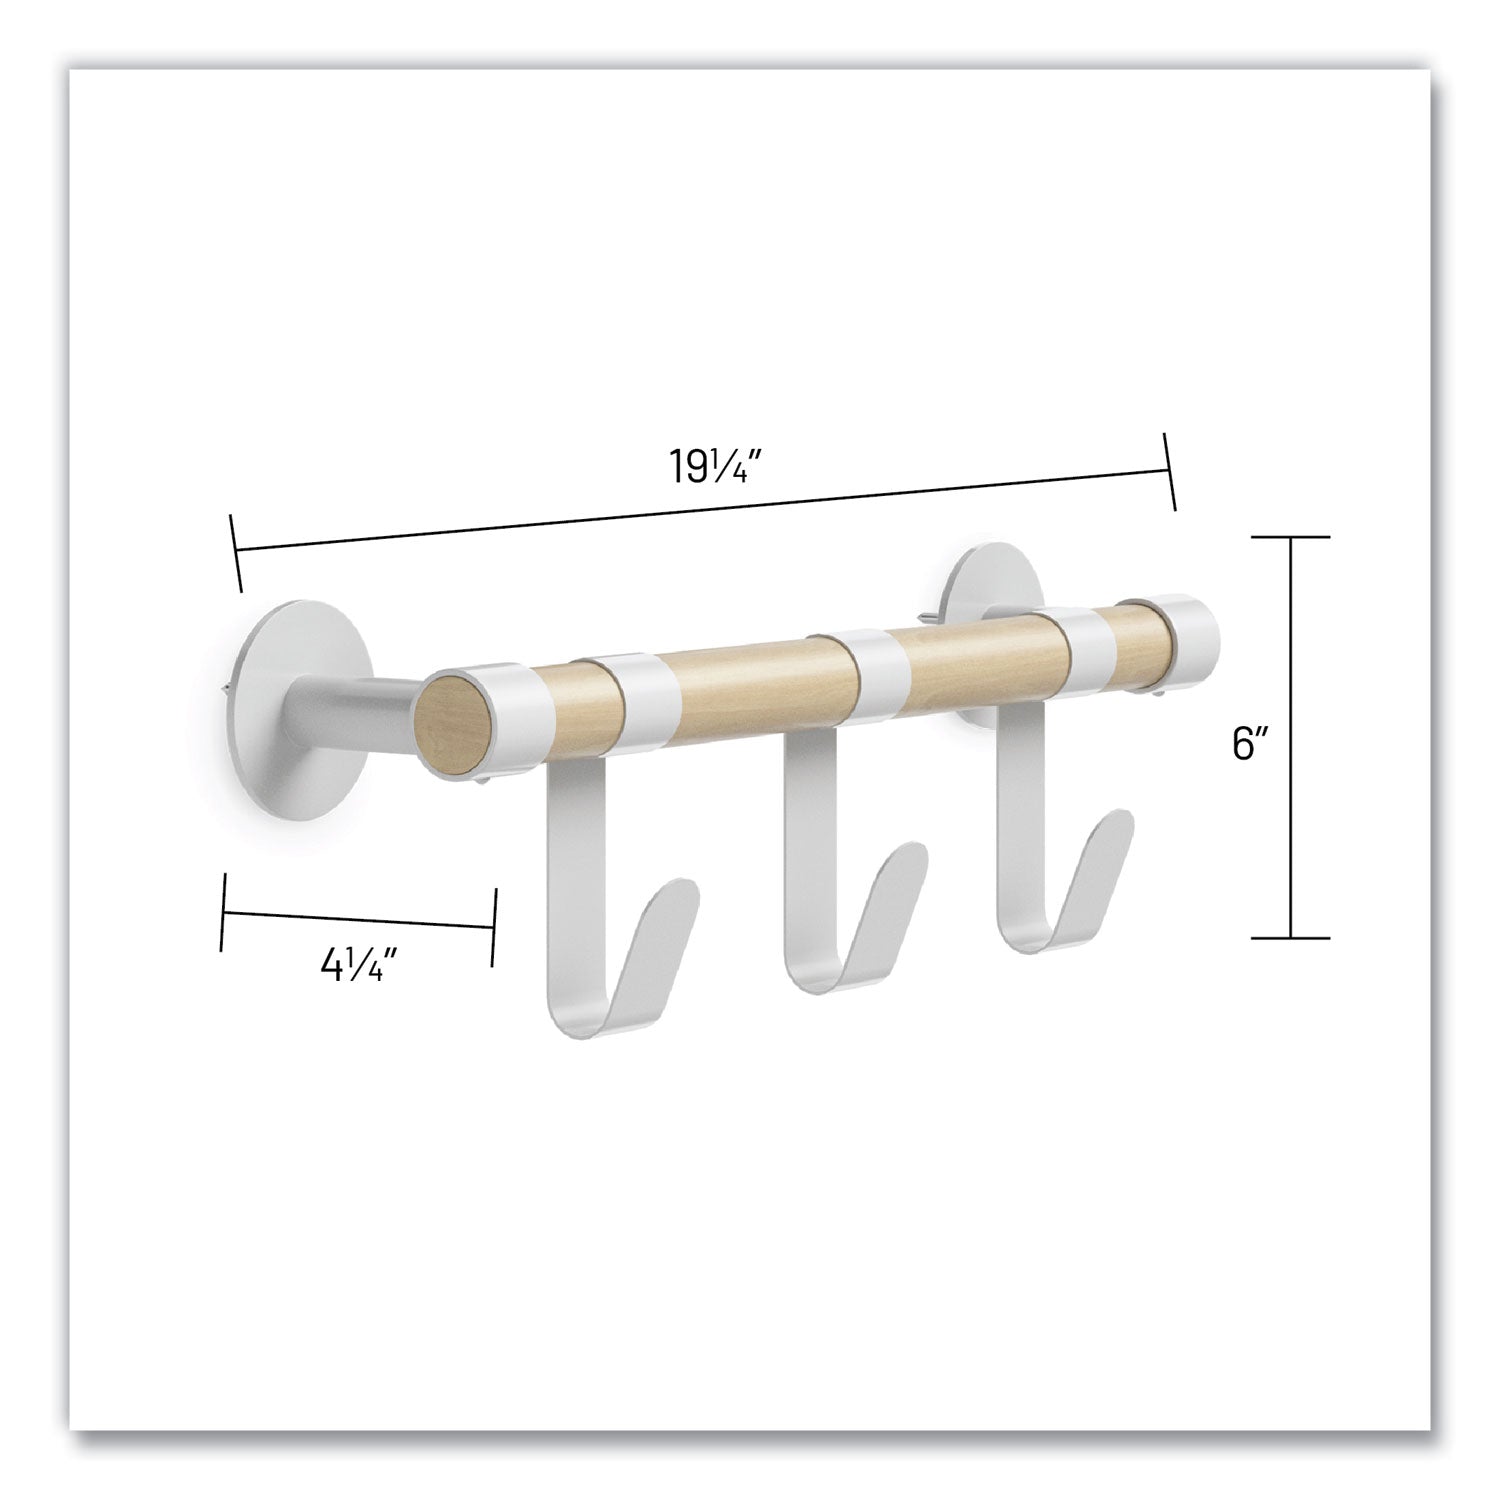 resi-coat-wall-rack-3-hook-1975w-x-425d-x-6h-white-ships-in-1-3-business-days_saf4263wh - 7